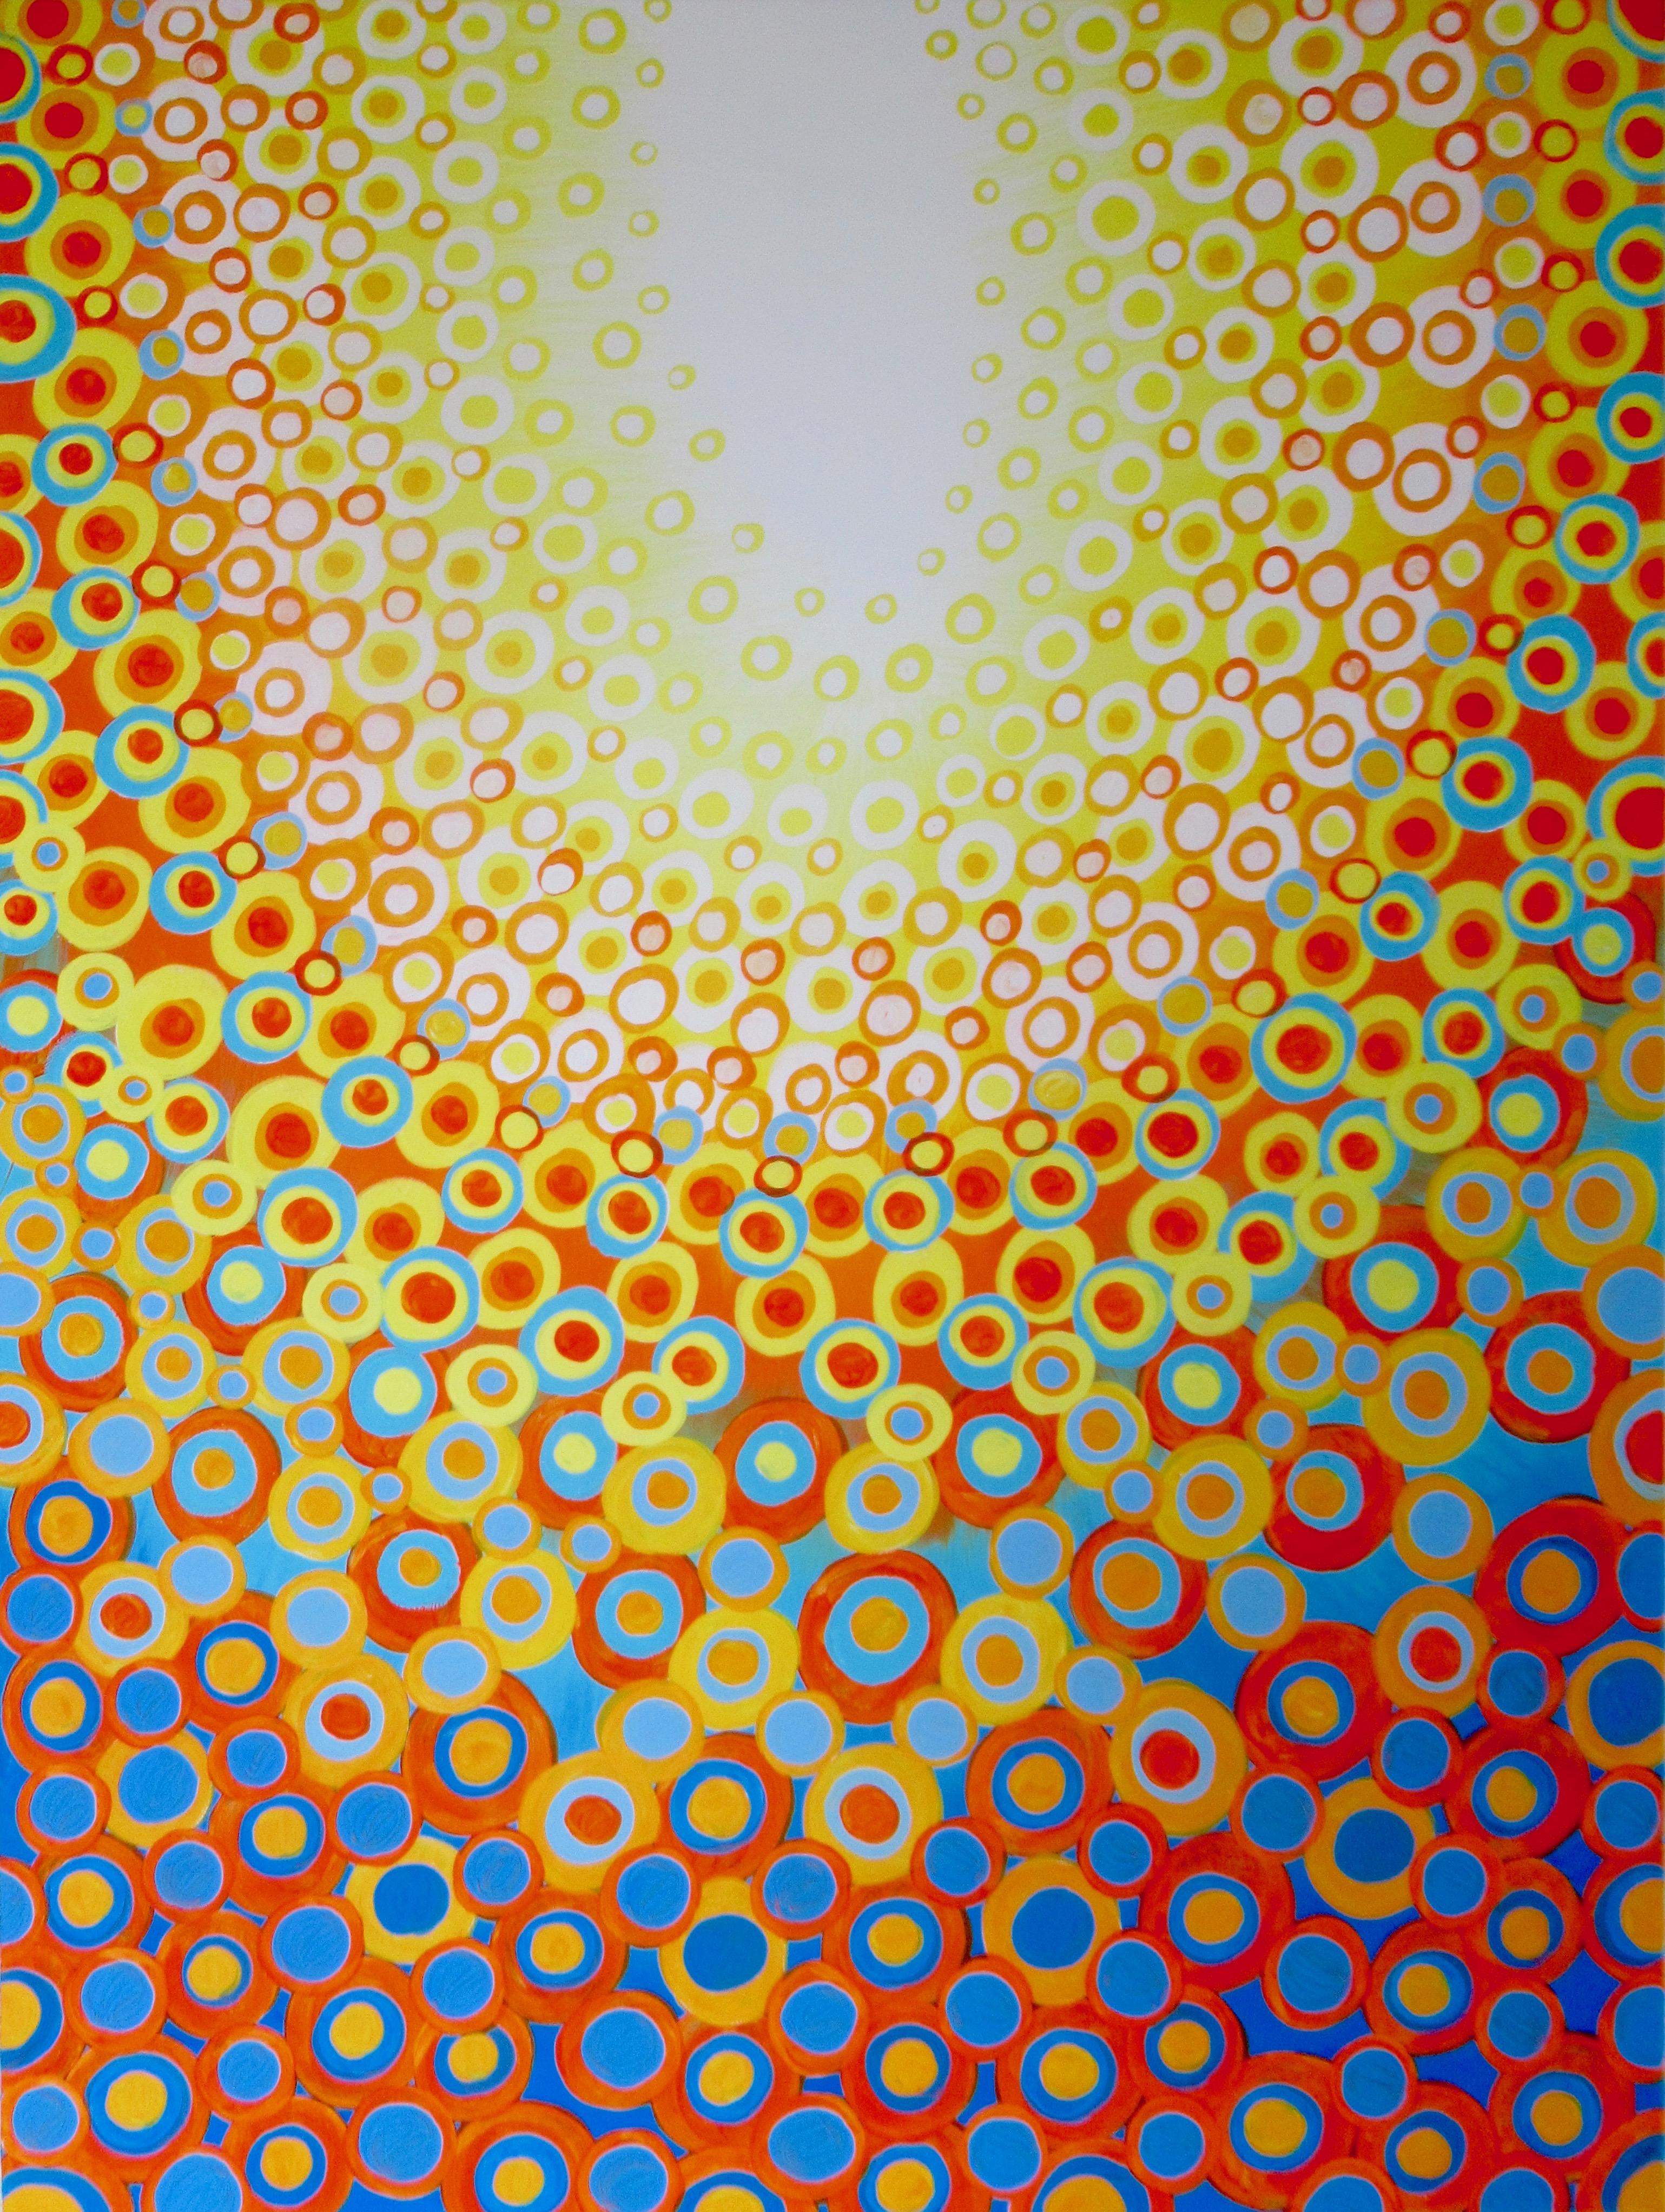 Yellow, Orange and Blue, Abstract Painting - Art by Natasha Tayles